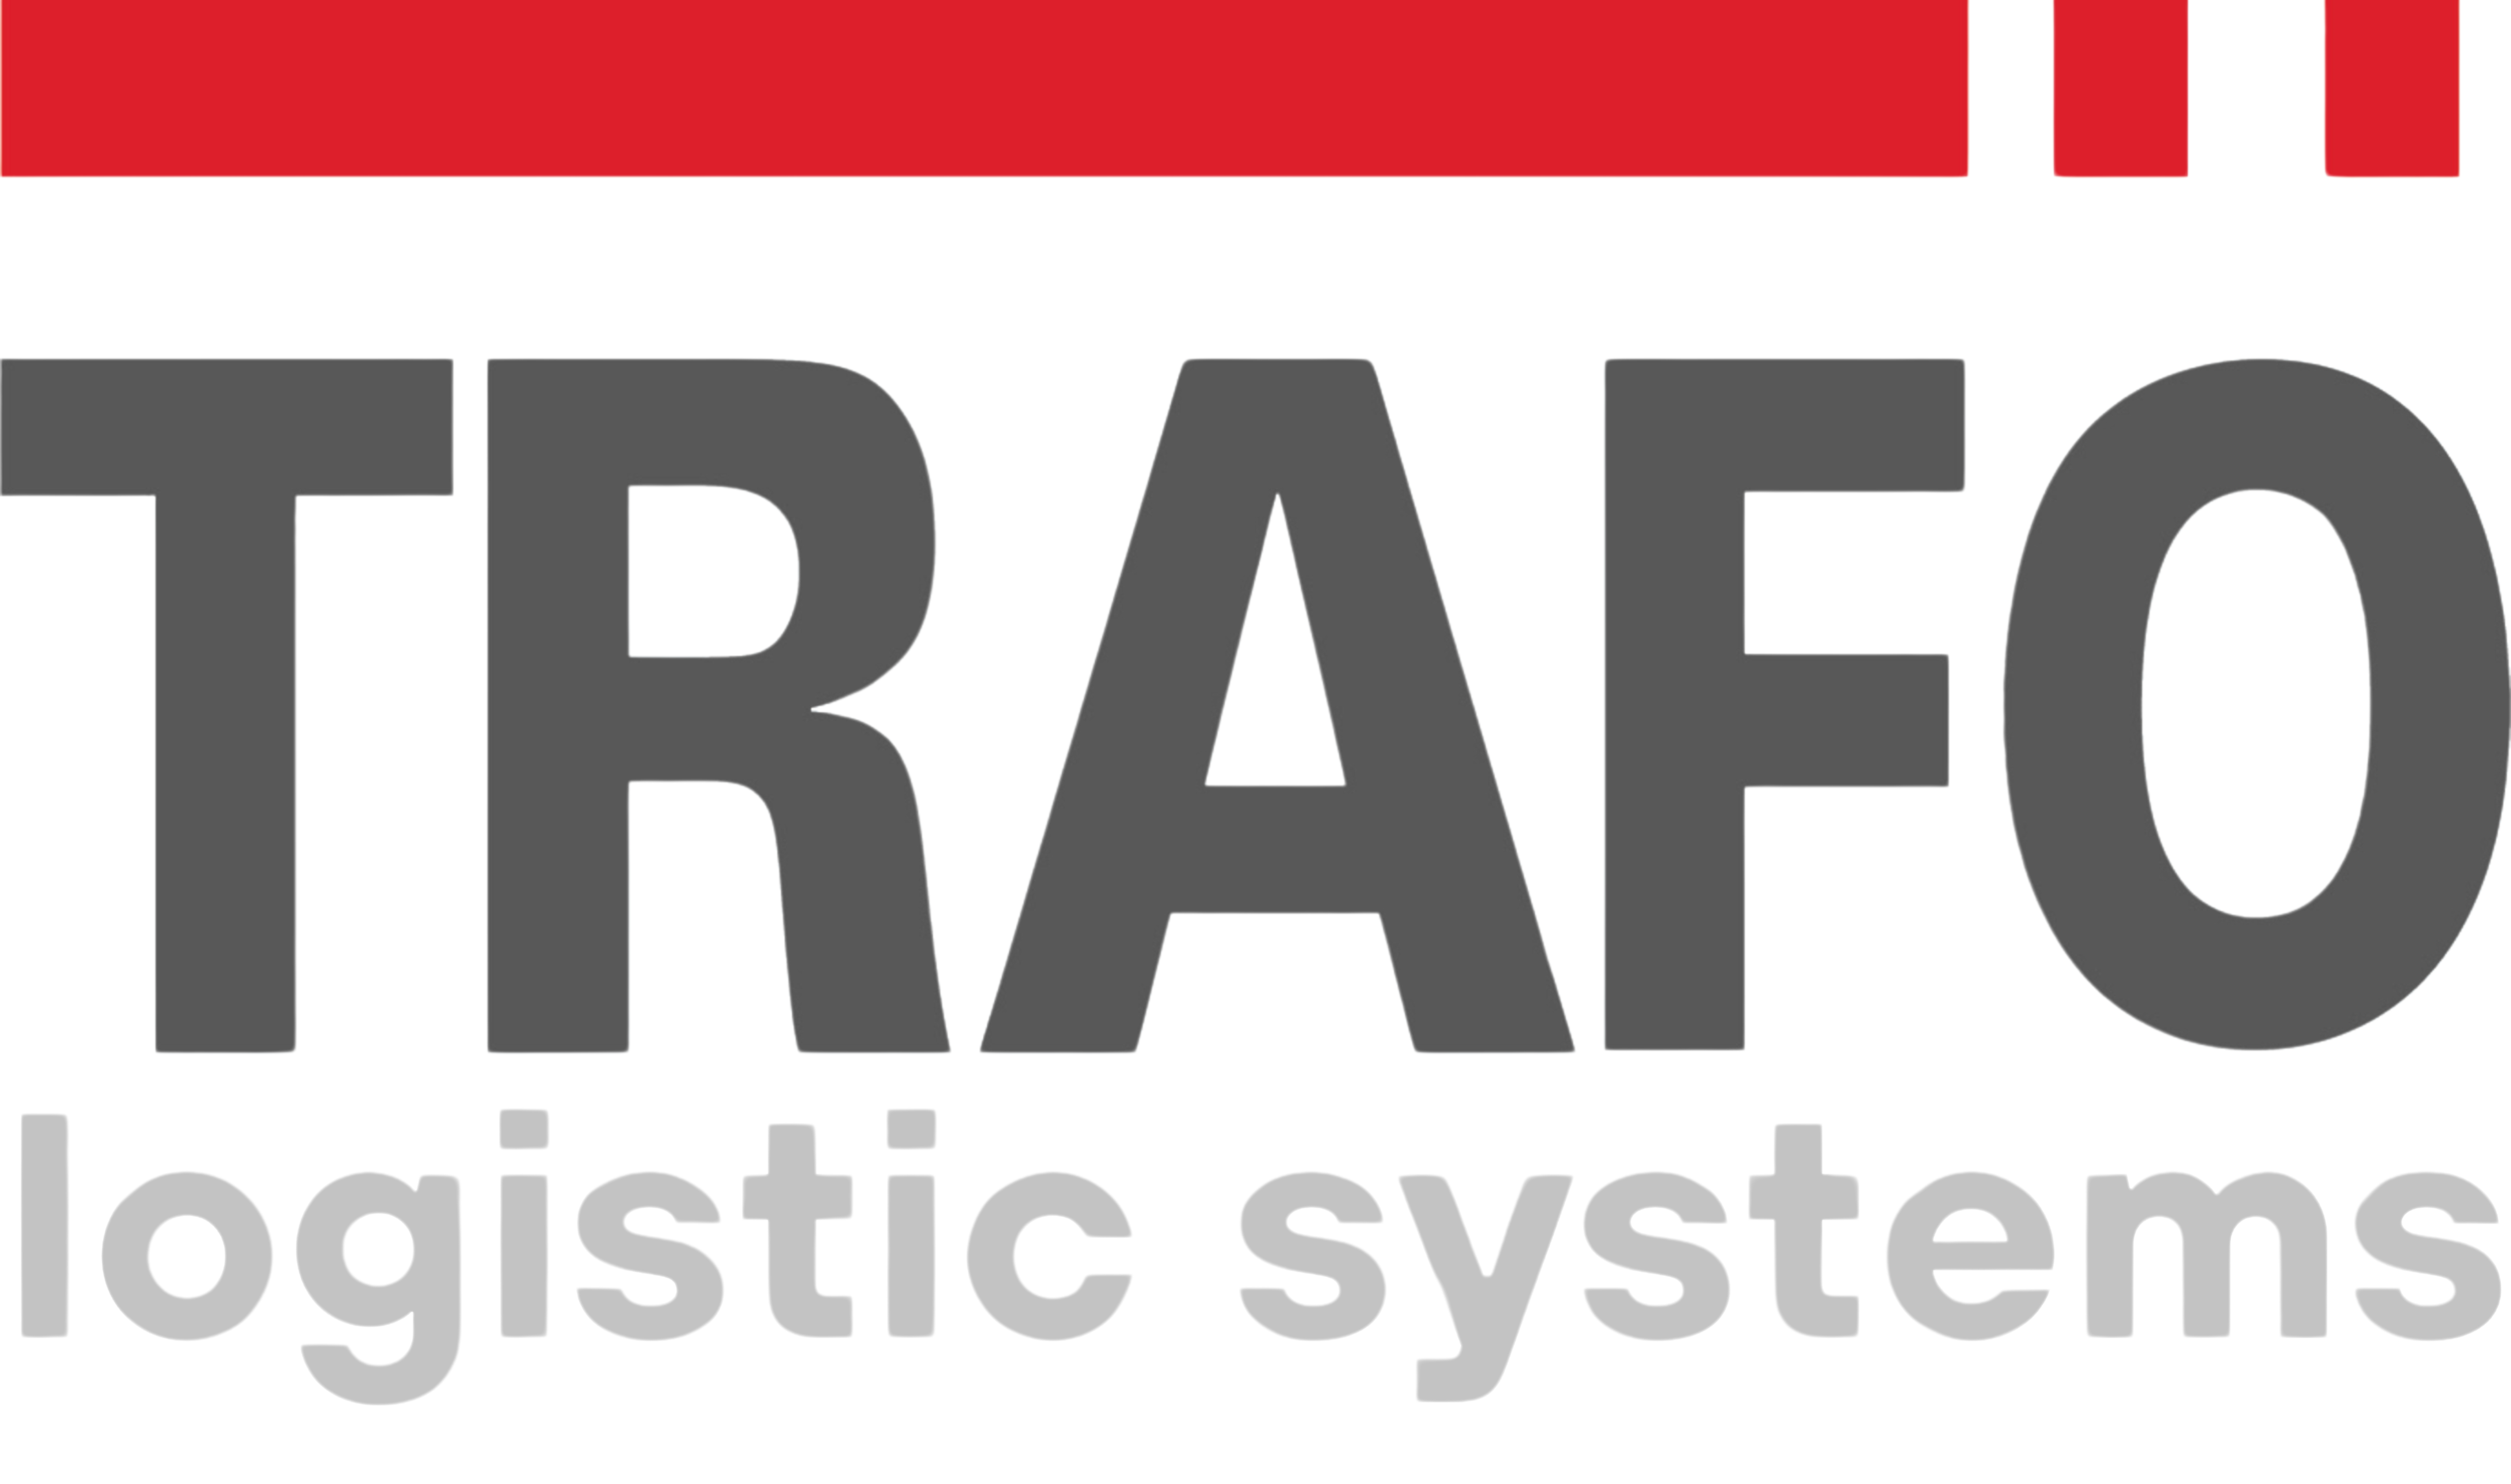 Trafö logistic systems